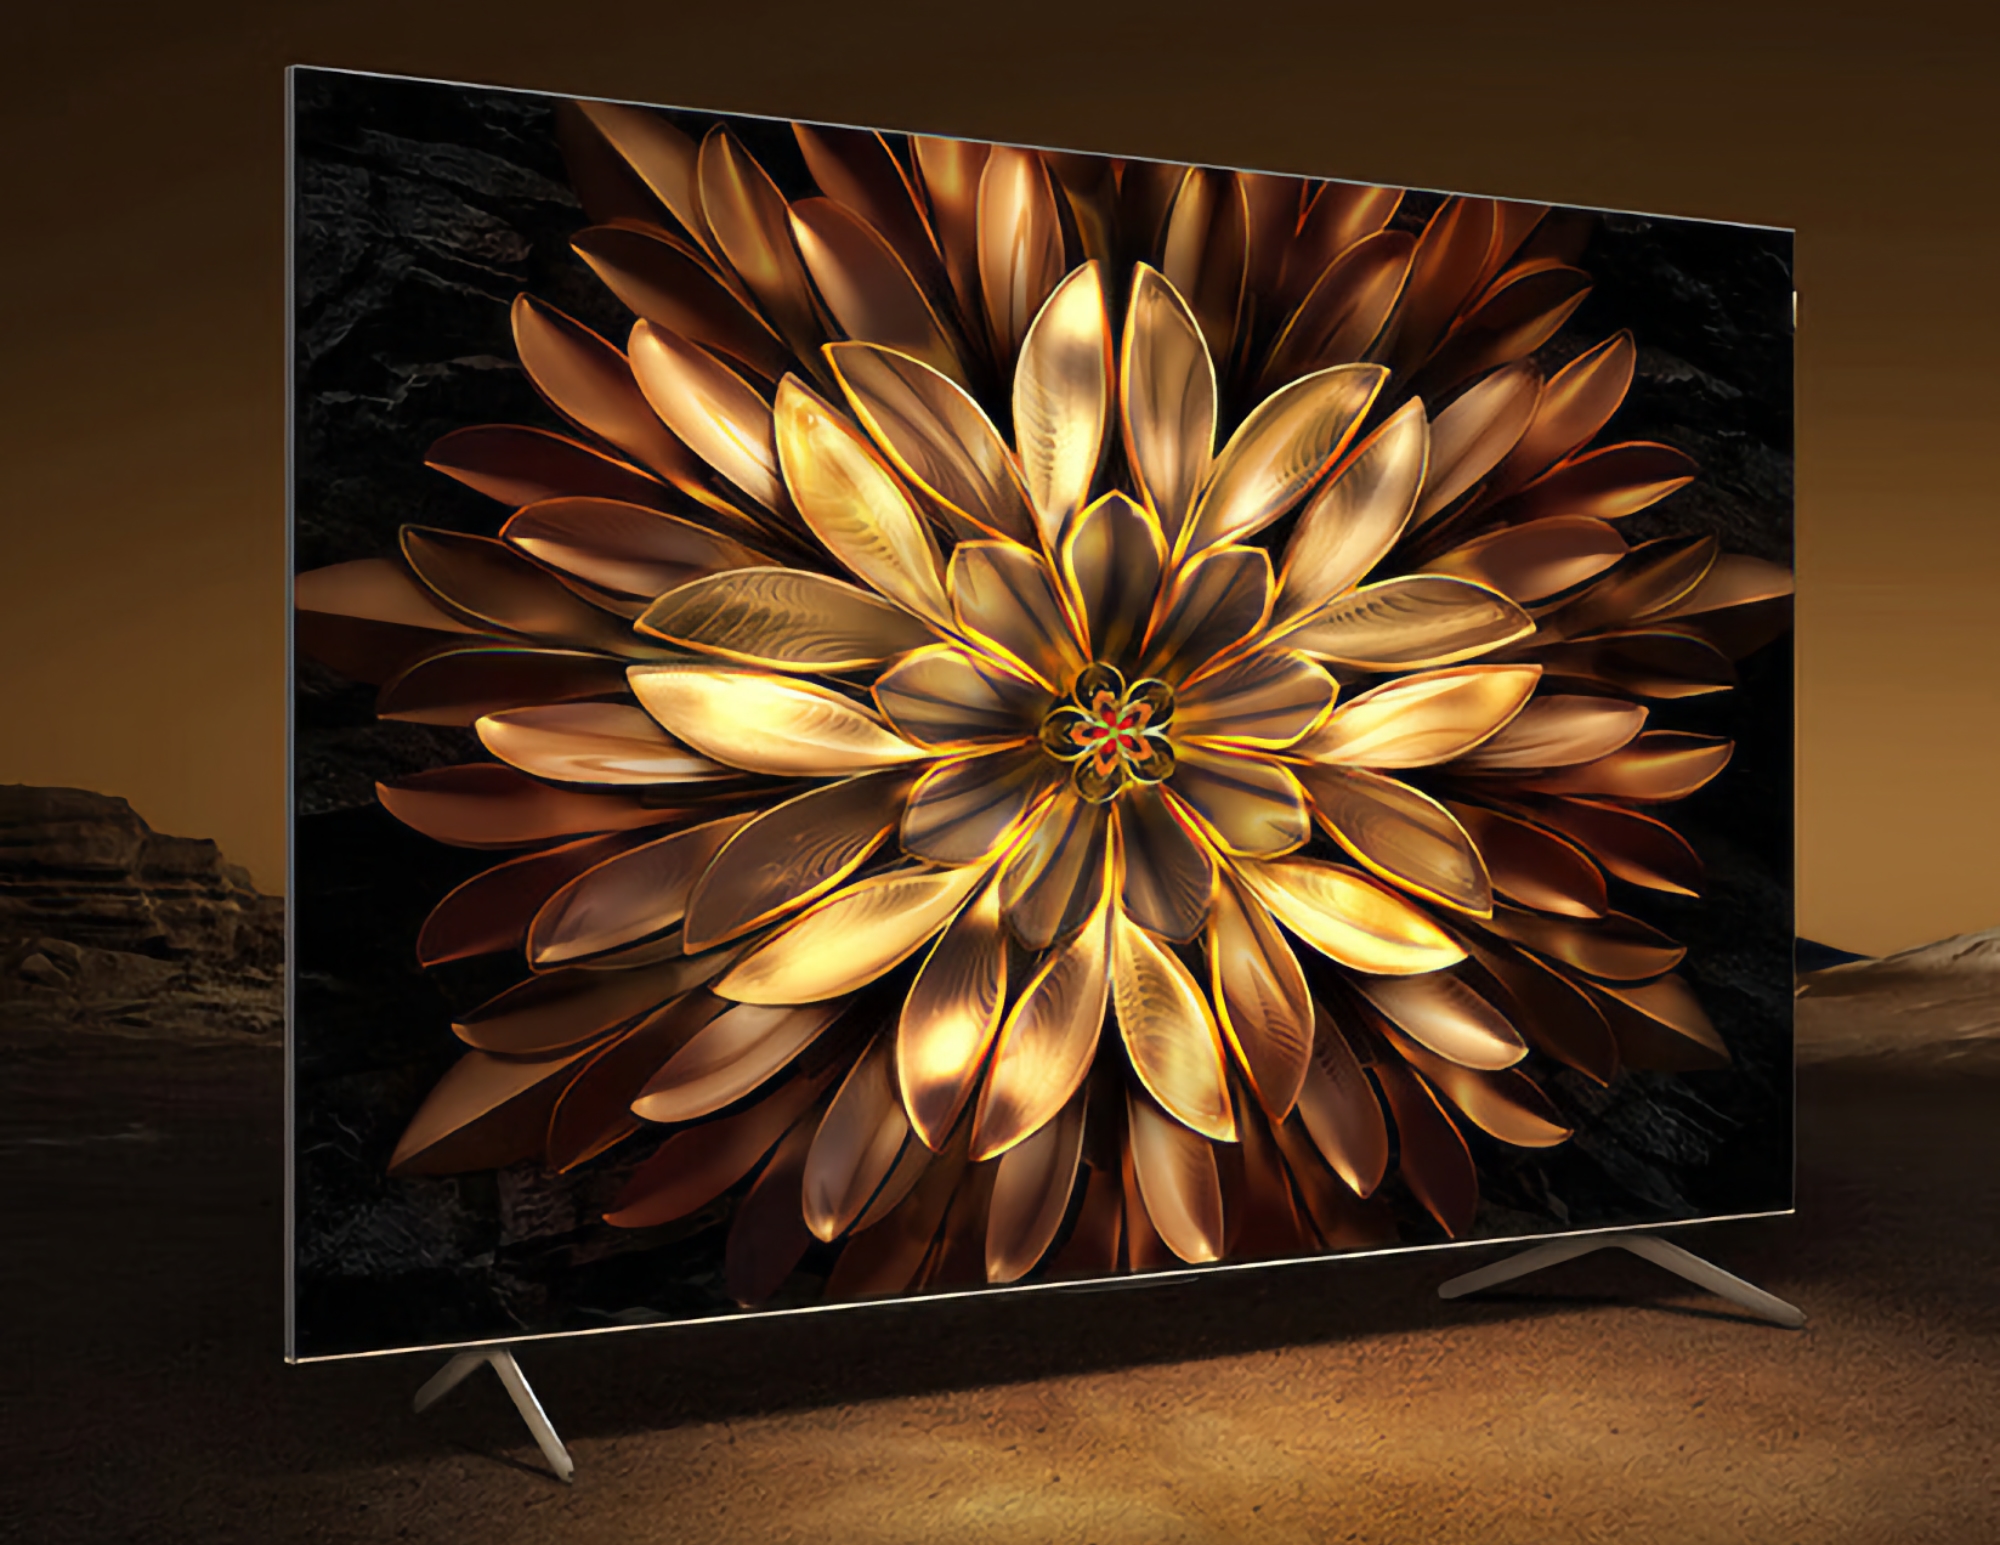 TCL C11G: smart TV range with 4K 55-75" displays and 144Hz refresh rate